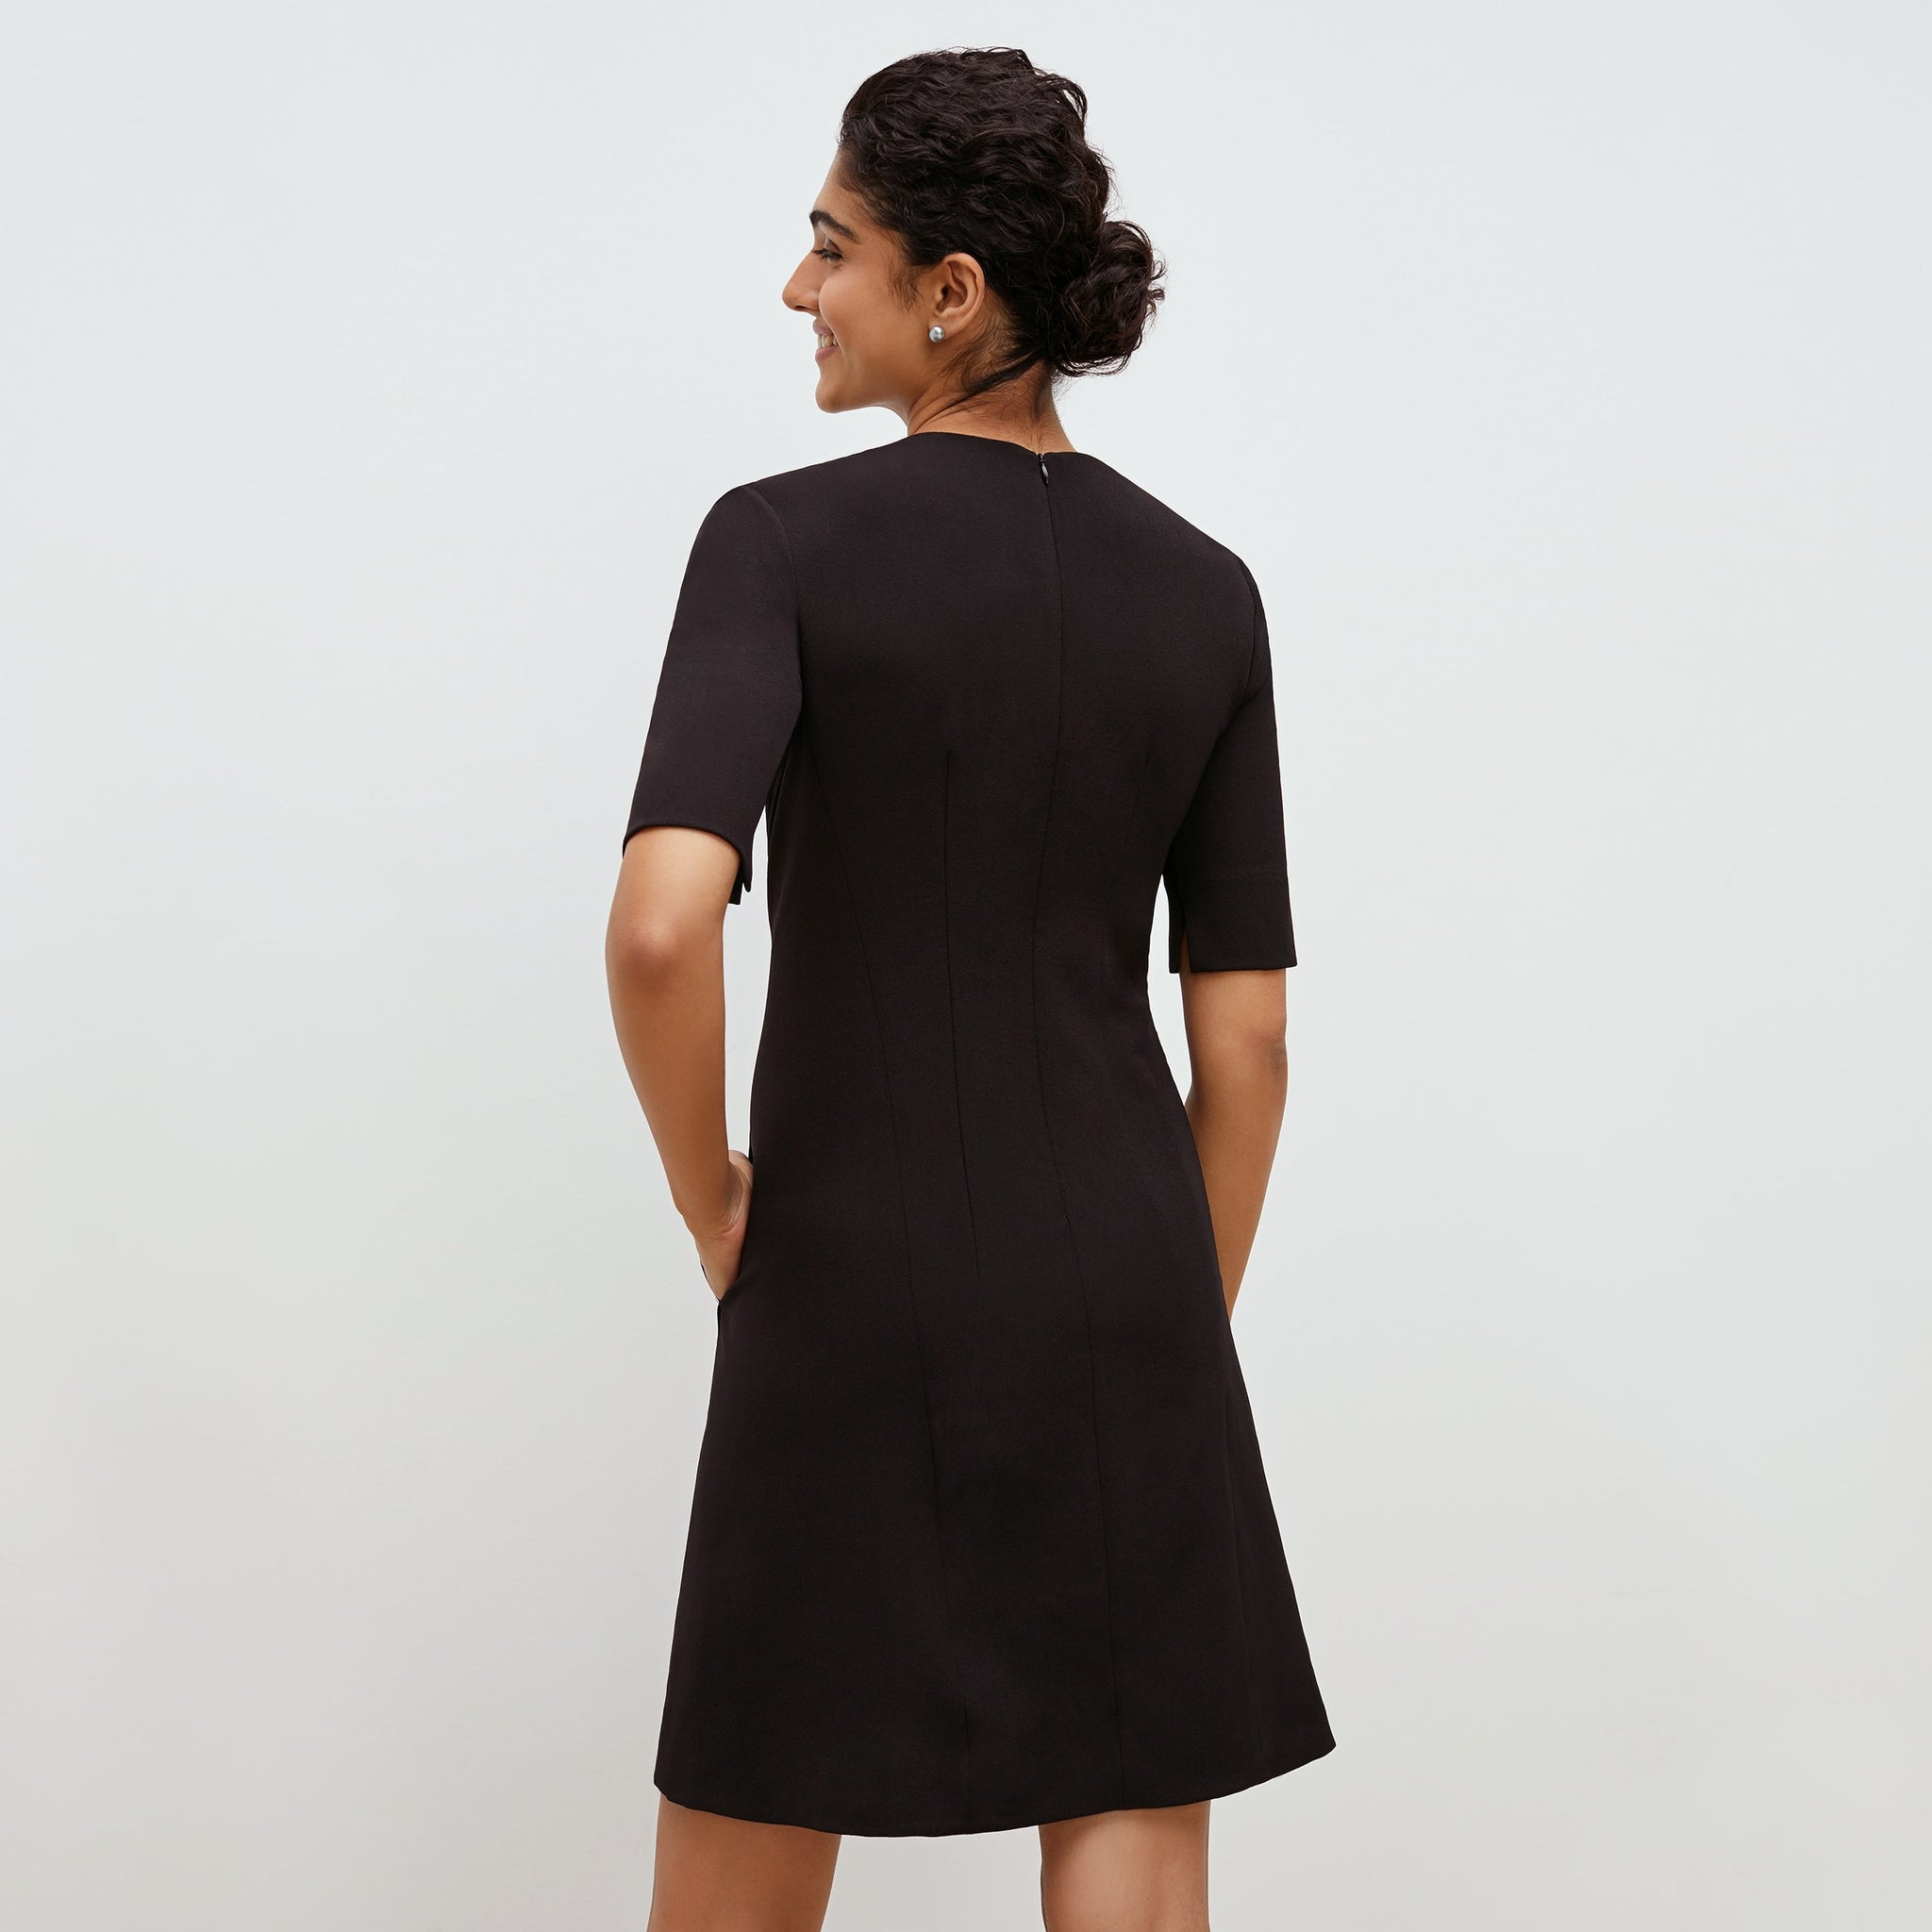 Back image of a woman standing wearing the emily dress in black